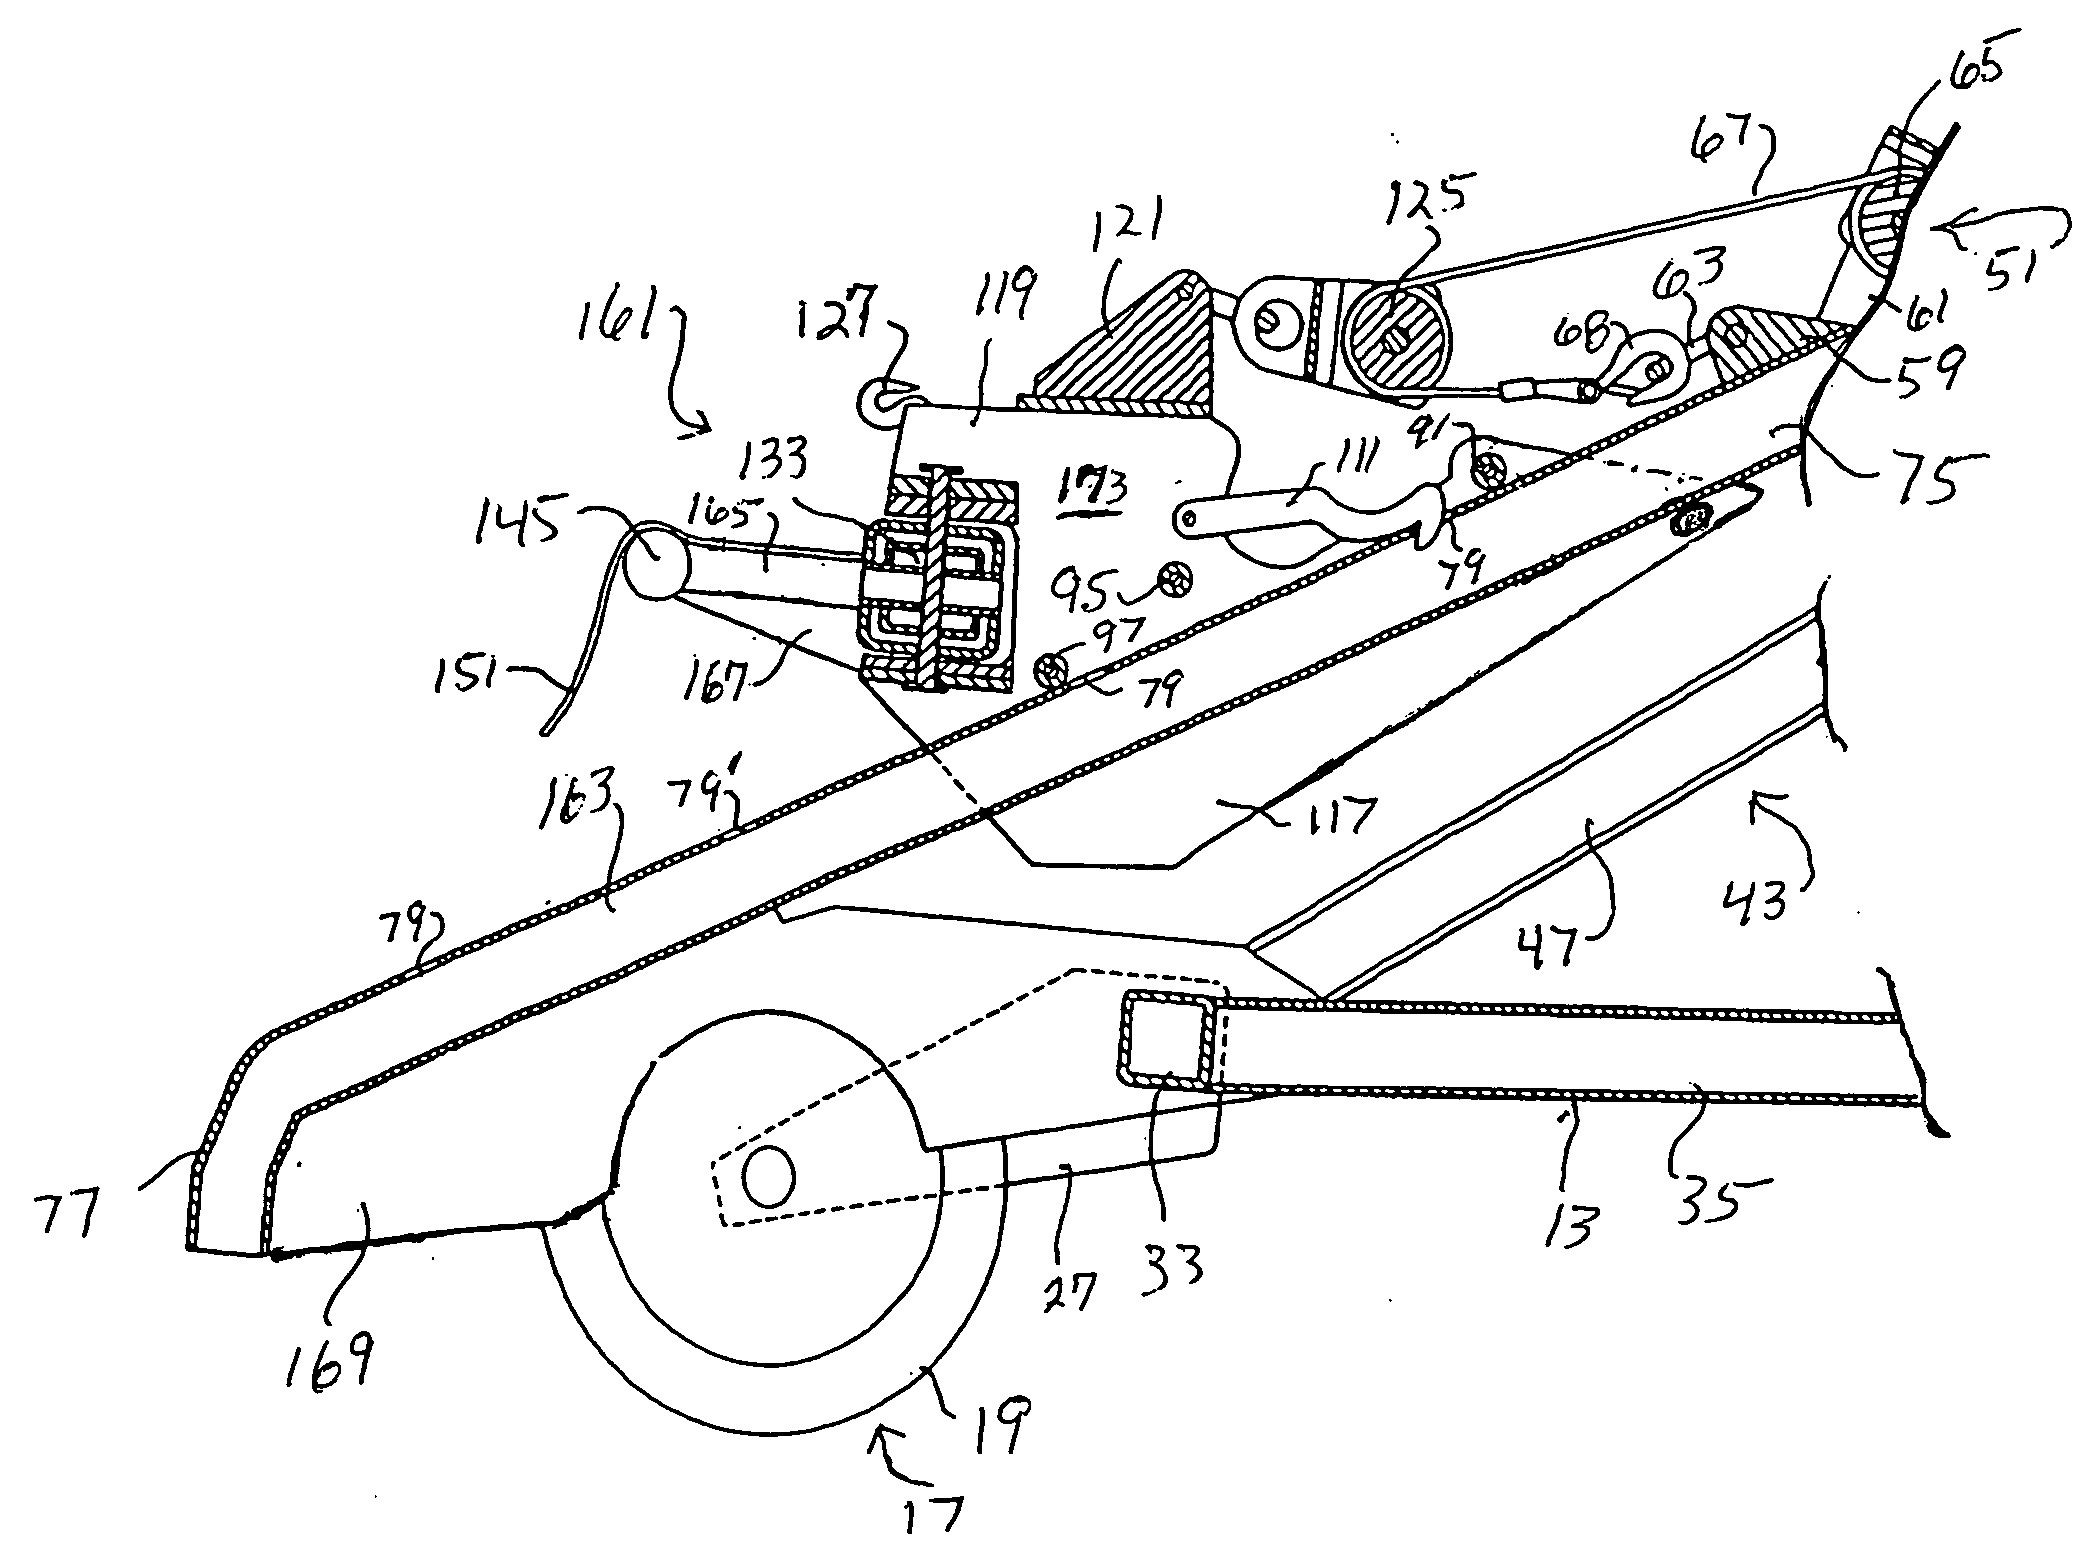 Intermediate apparatus for towing utility vehicles